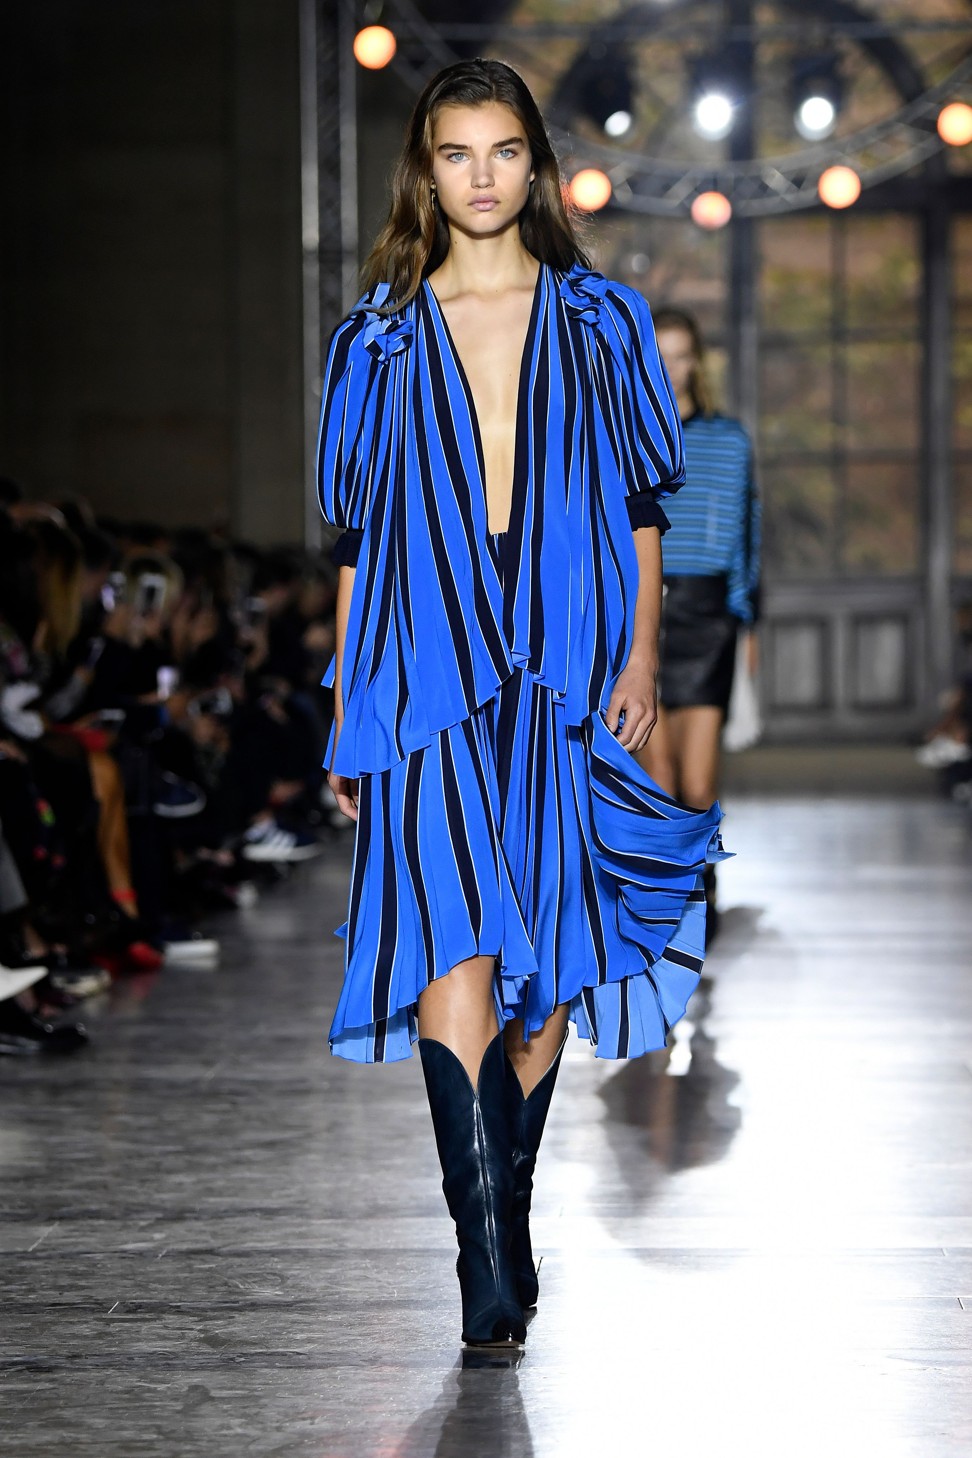 Clare Waight Keller drives change at Givenchy while honouring classic ...